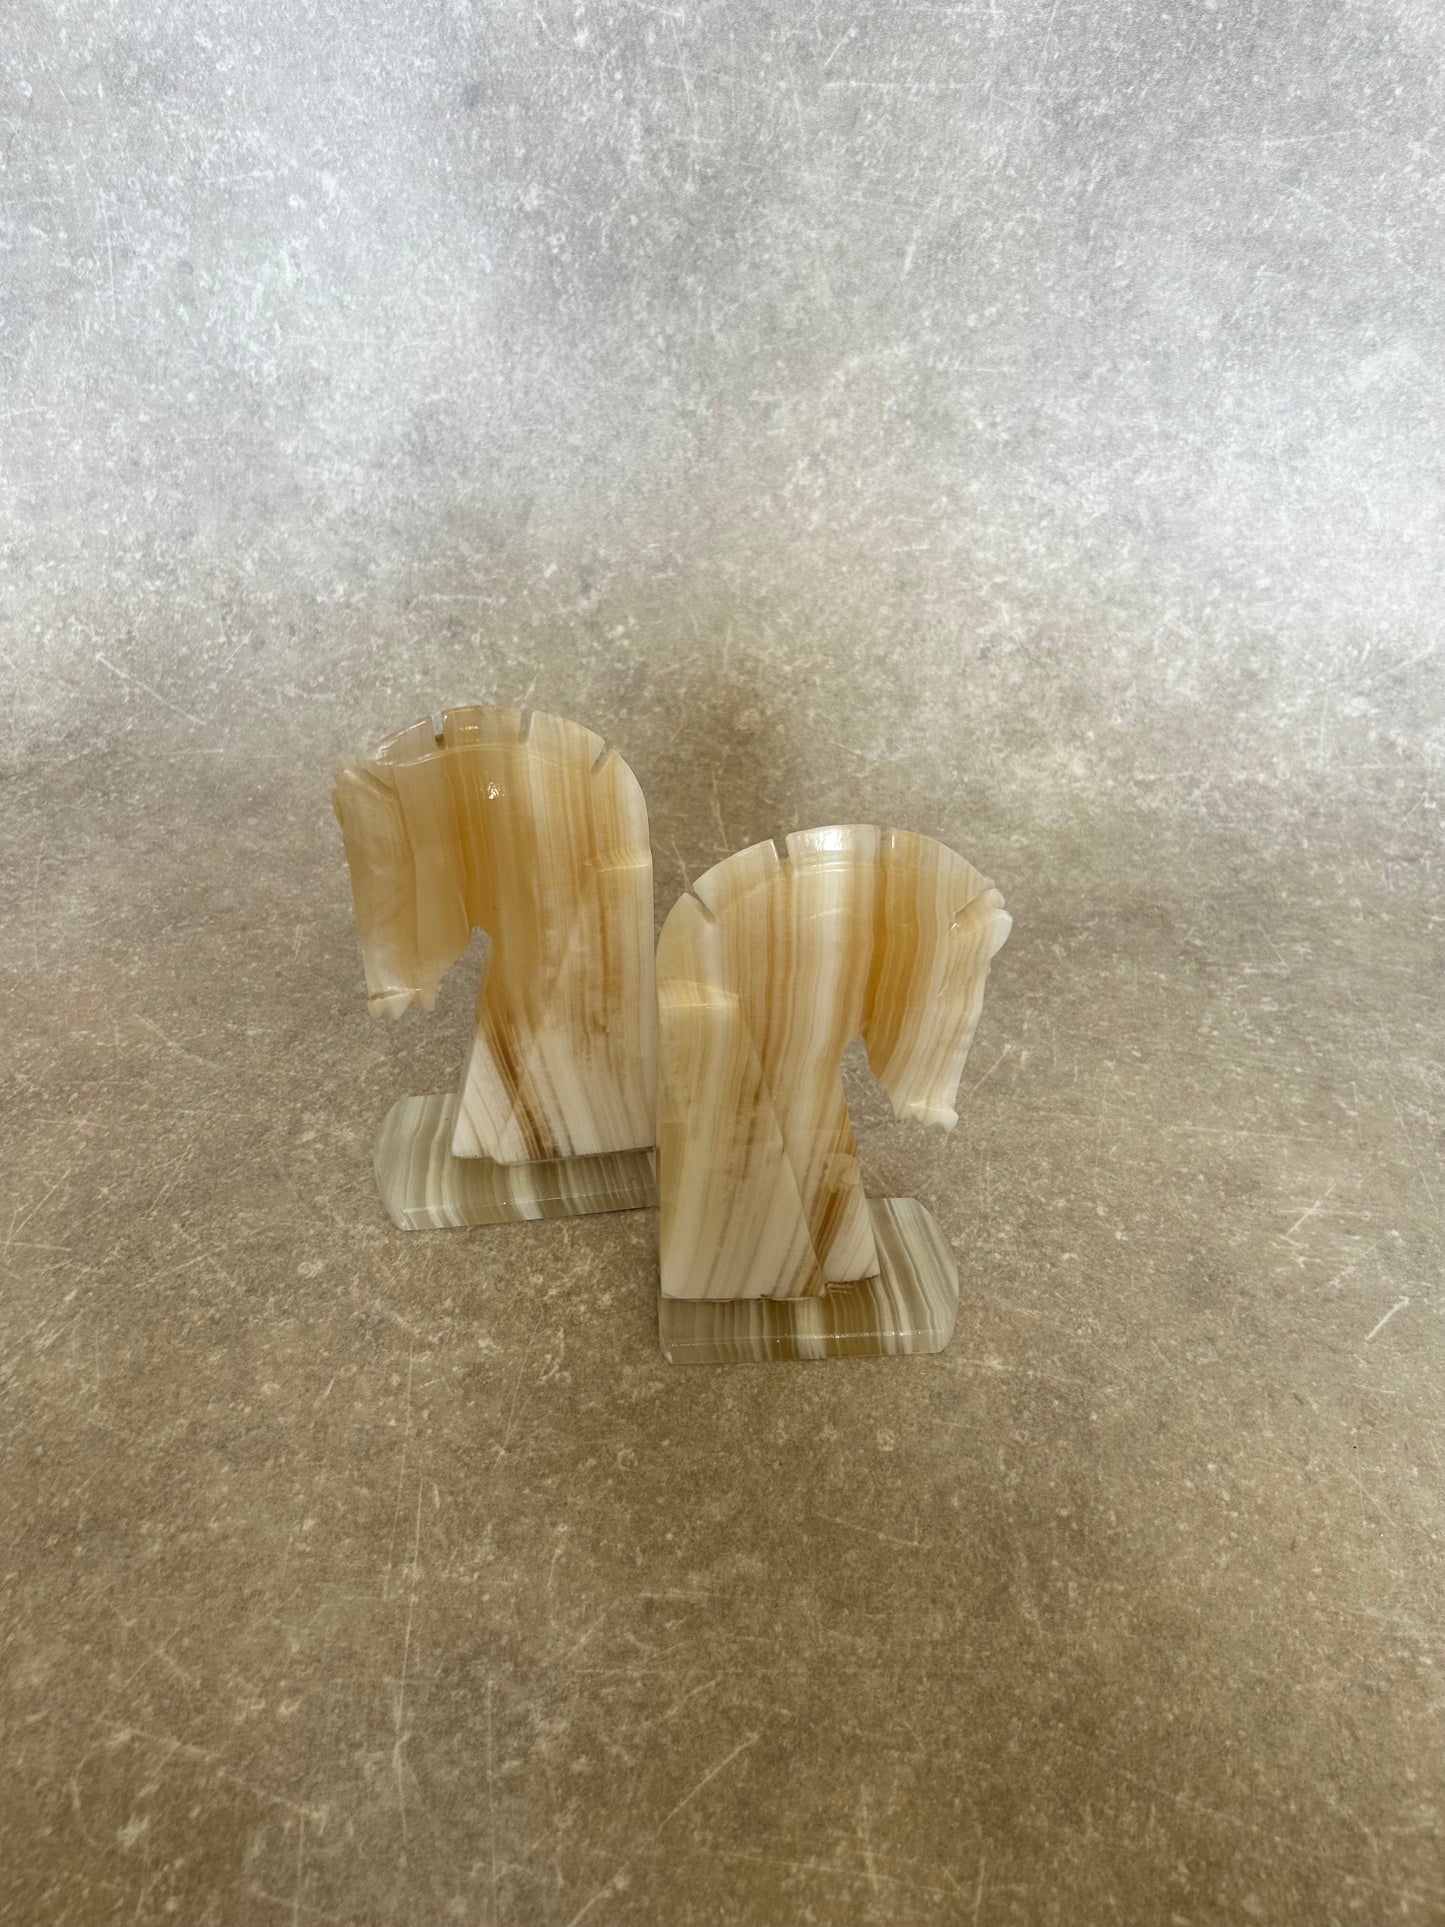 Pair of Large Onyx Horsehead Bookends